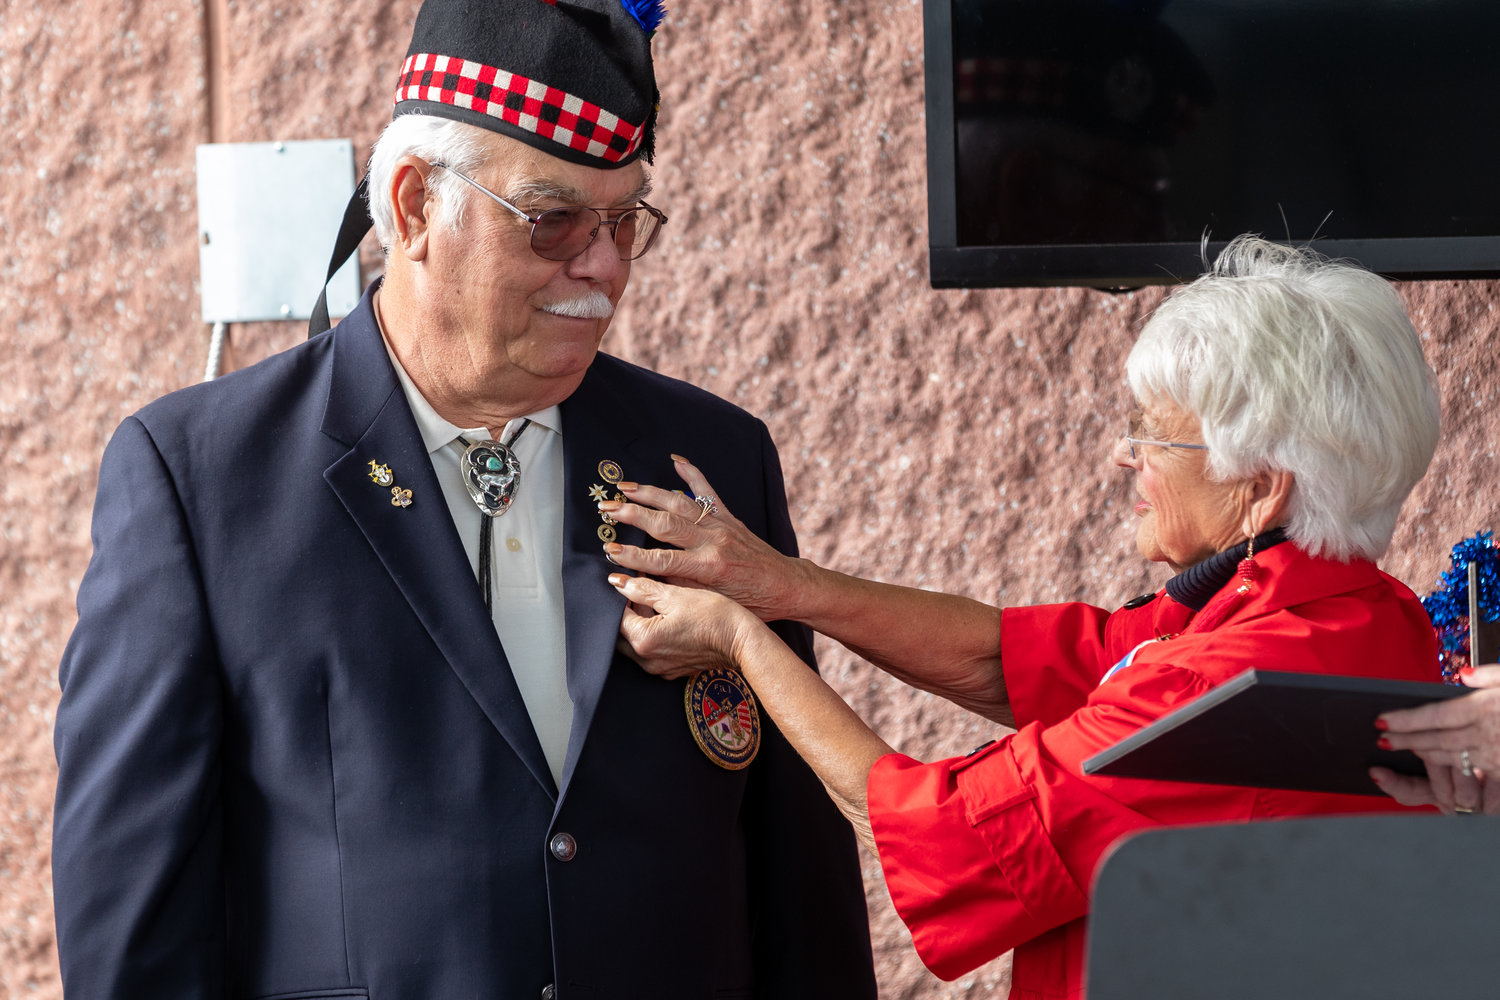 Don Talbot is recognized for his community service by The National Society of the Daughters of the American Revolution during the Blue Star Memorial Veterans Day Ceremony on Friday at the N.C. Veterans Park.